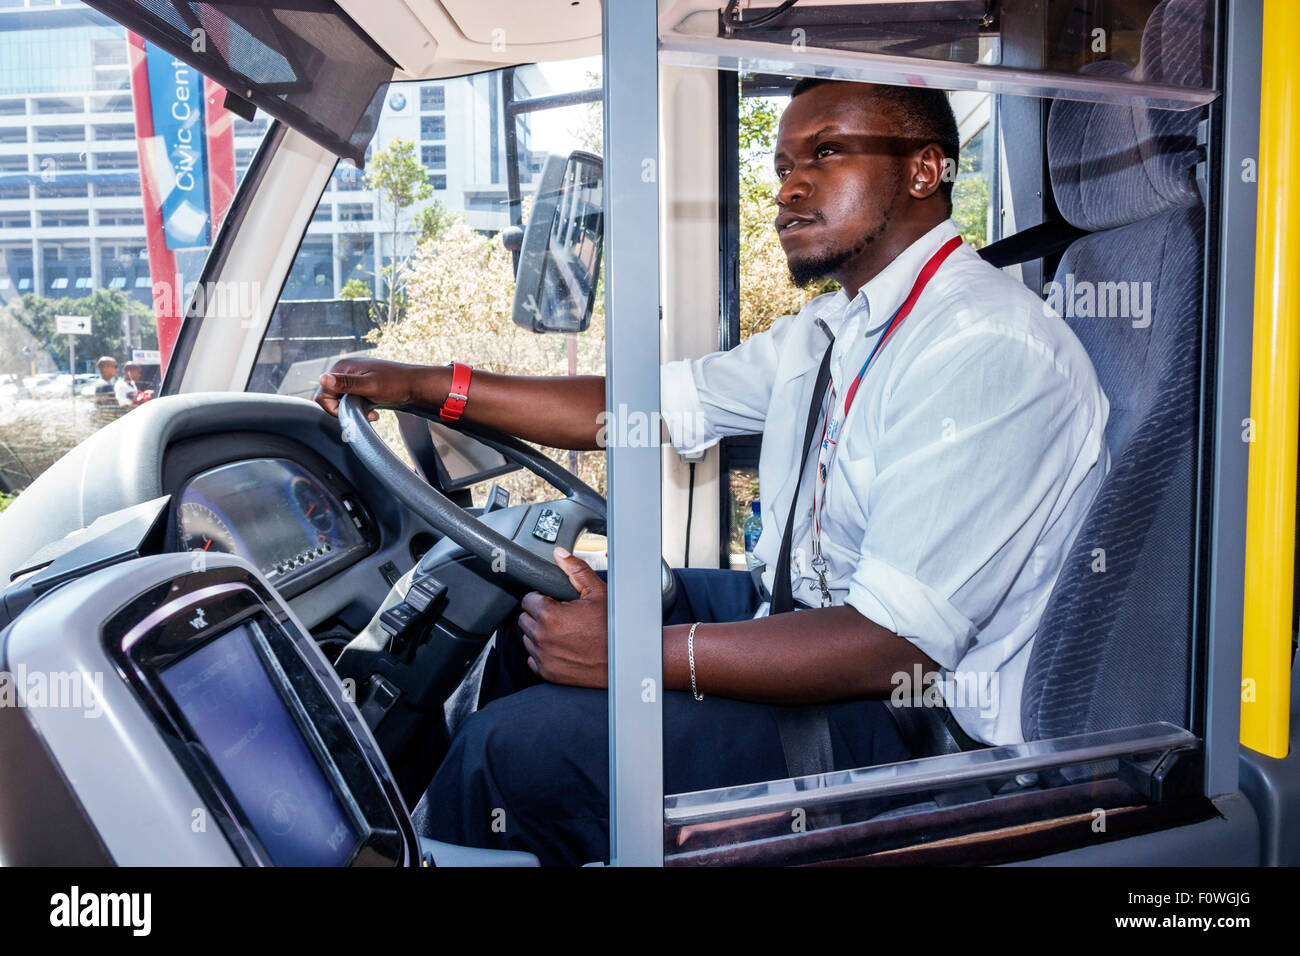 Cape Town South Africa,City Centre,center,Civic Centre Station,MyCiTi bus, driver,working work worker workers,employee staff,driving,SAfri150311007  Stock Photo - Alamy